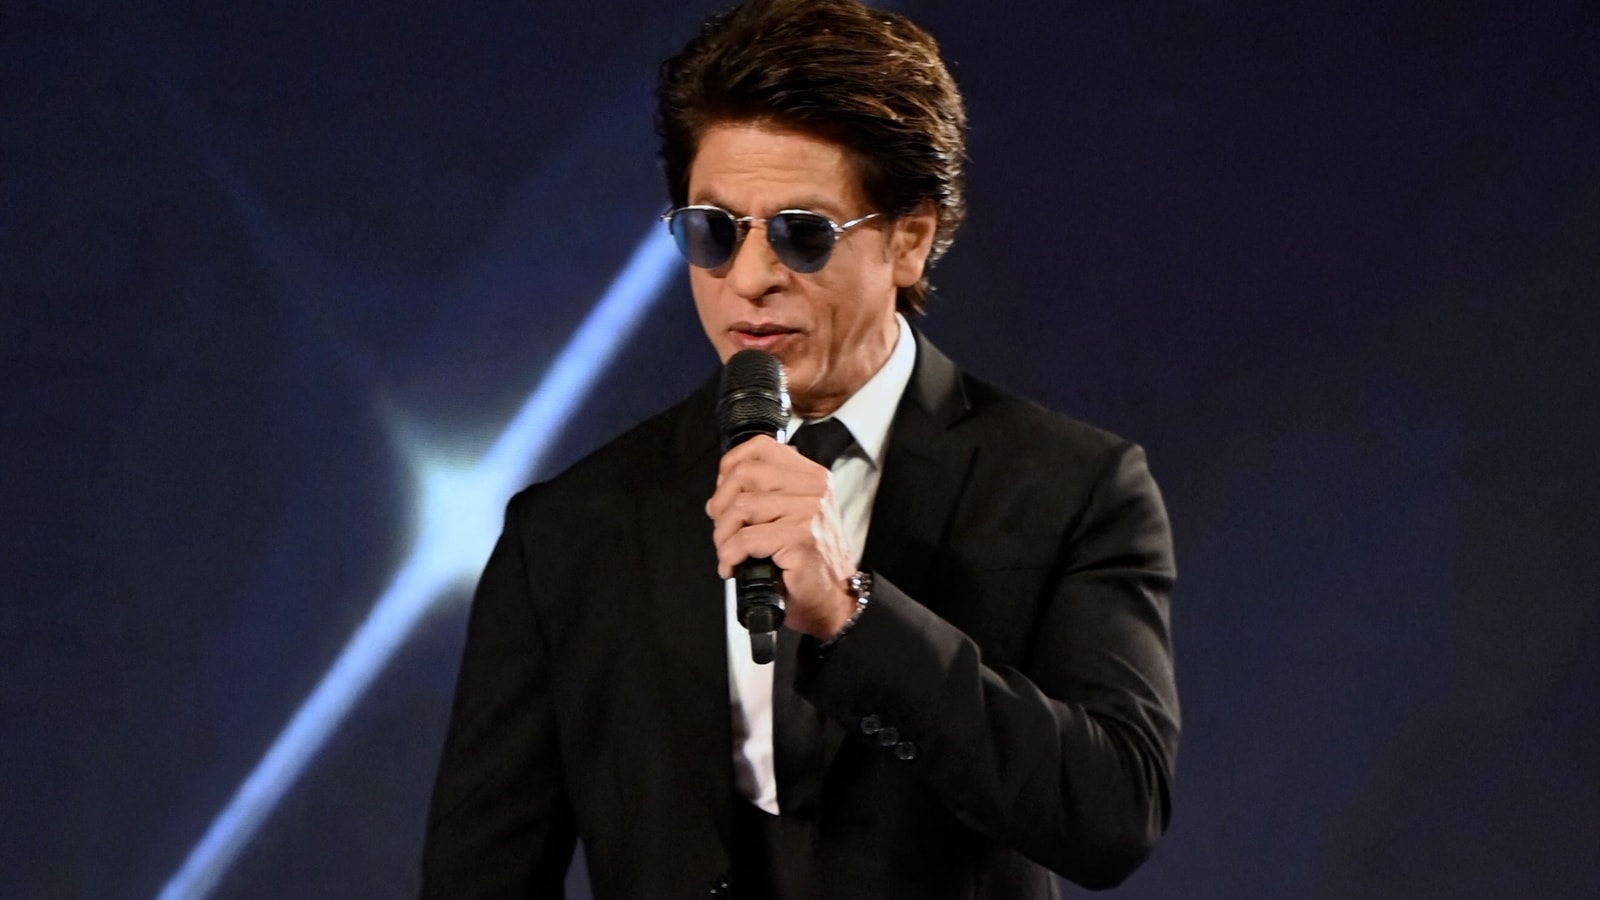 Shah Rukh Khan is Bollywood’s latest superstar, here’s why